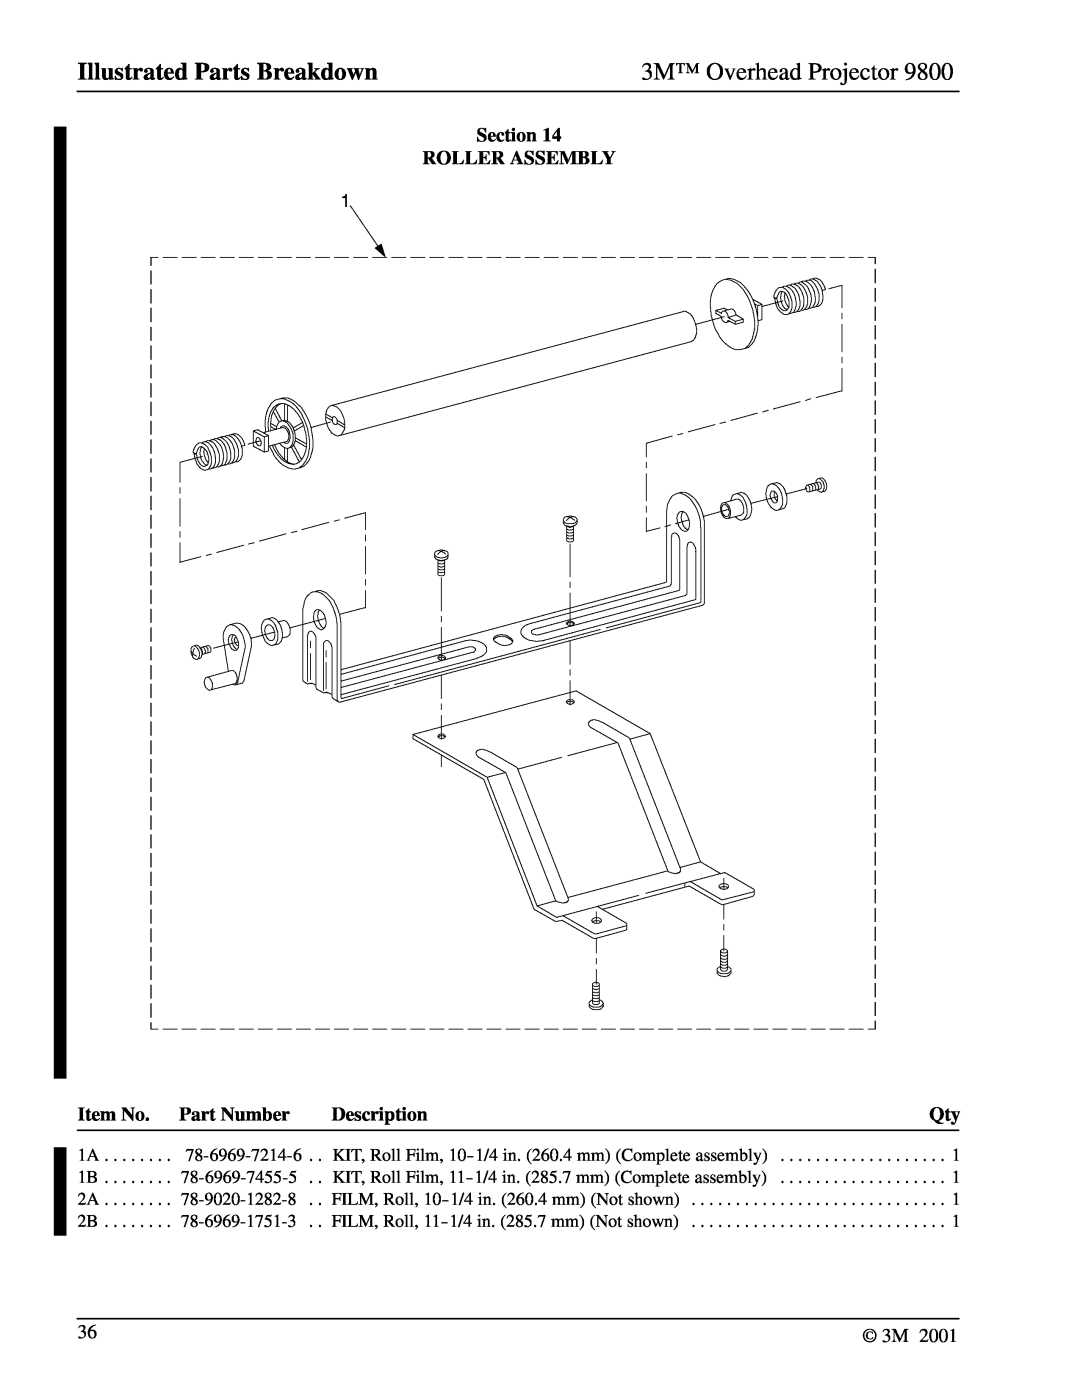 3M 9800 Section ROLLER ASSEMBLY, Item No. Part Number, Illustrated Parts Breakdown, 3M Overhead Projector, Description 